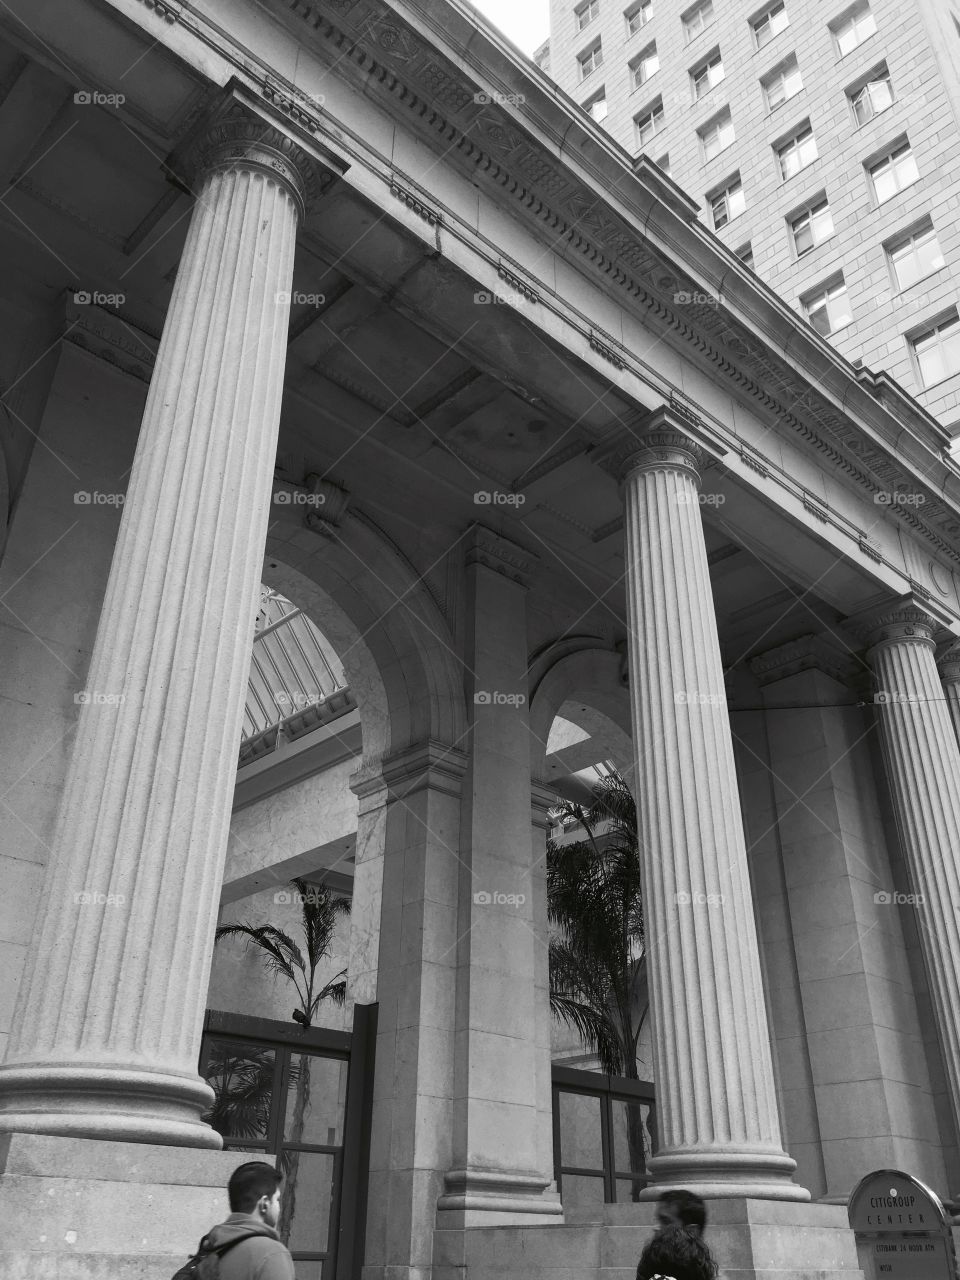 Column, Bedrock, Administration, Architecture, Courthouse